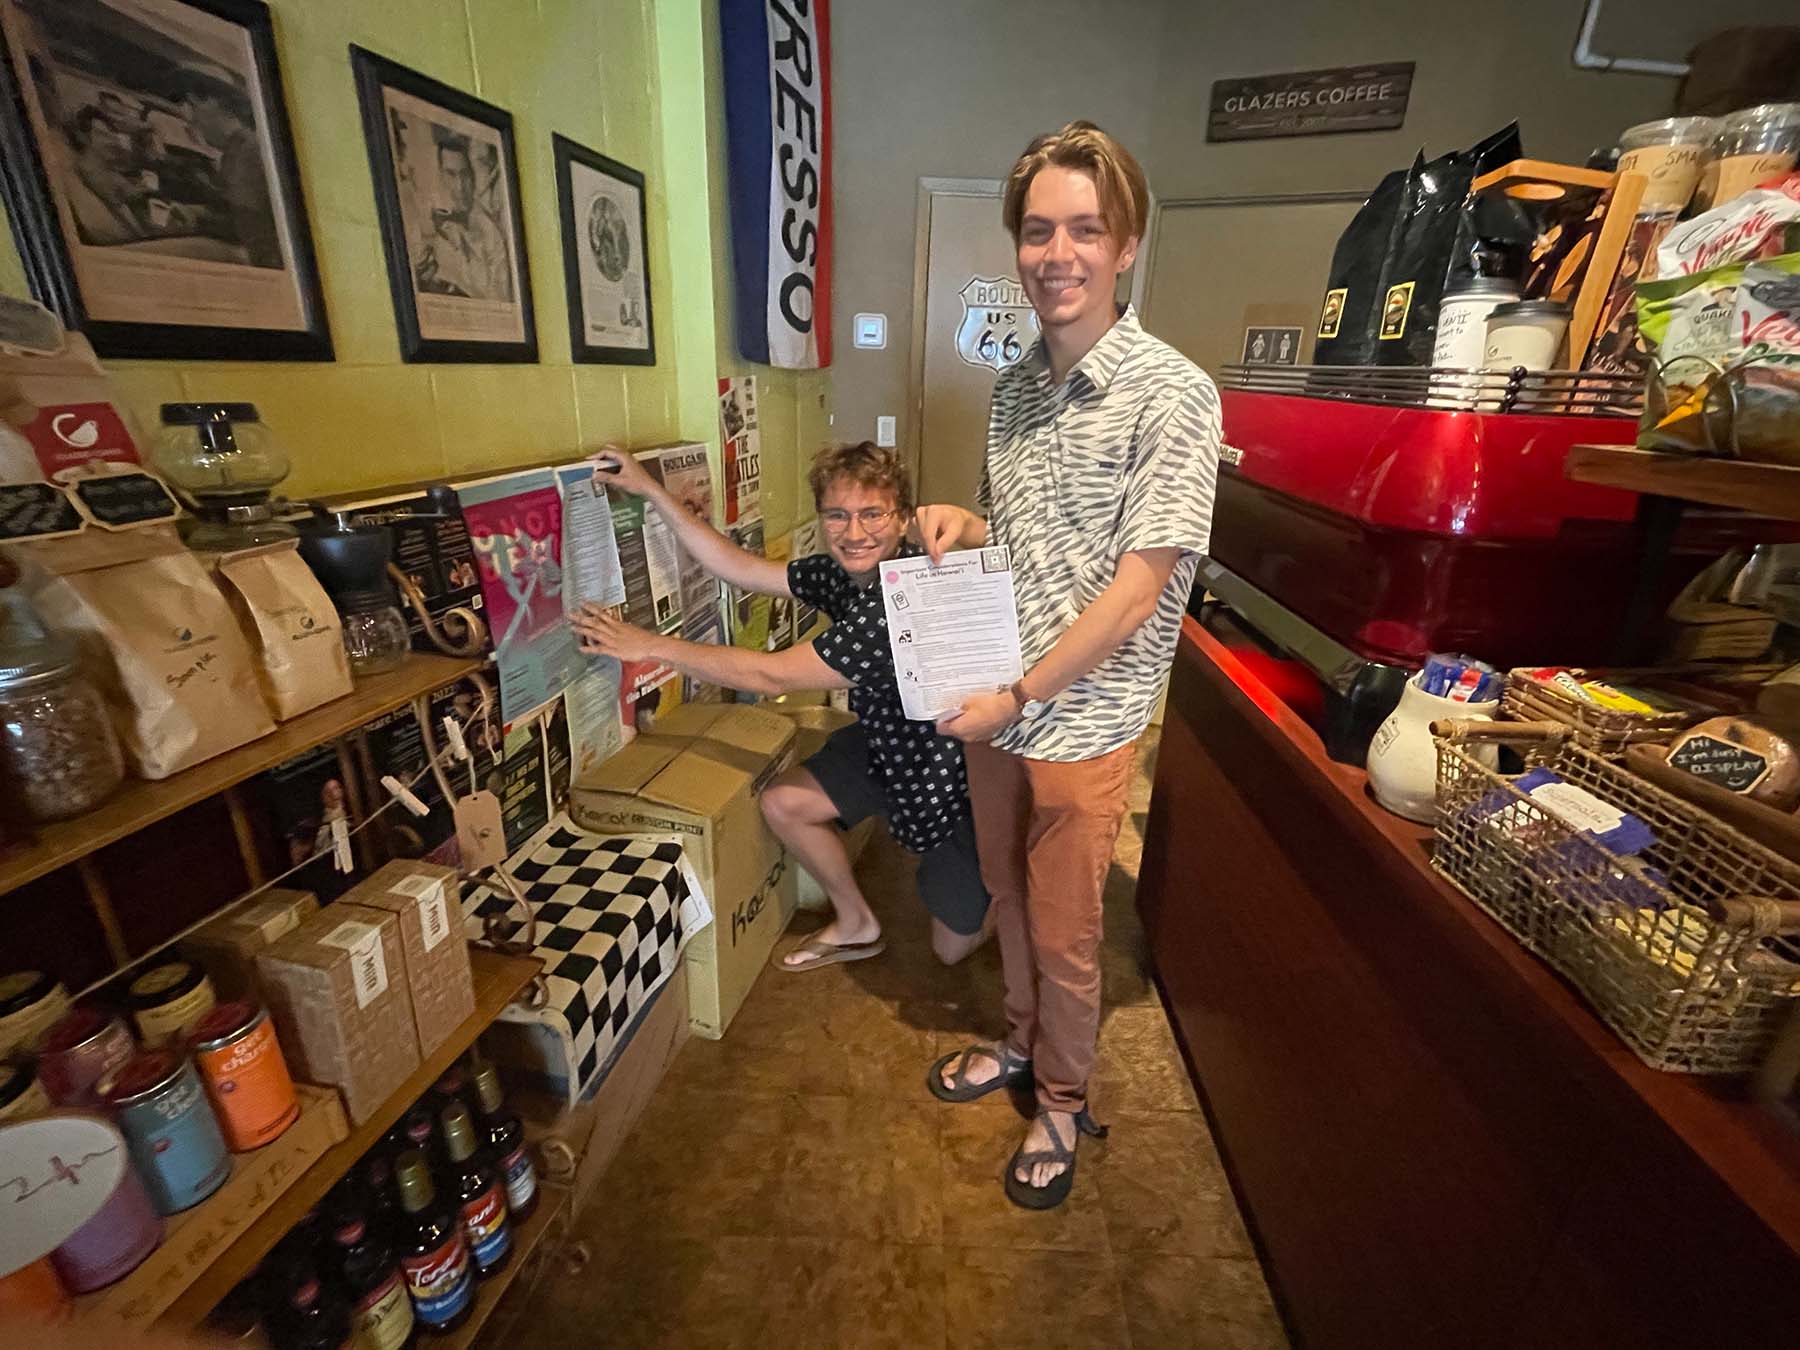 Christopher Unruh ’23 wearing navy blue patterned shirt, gray shorts and tan sandals and Chase Engel ’23 wearing gray and white patterned shirt, orange pants and brown sandals holding a document with immigrants’ legal rights inside Glazer’s Café next to shelves full of coffee products